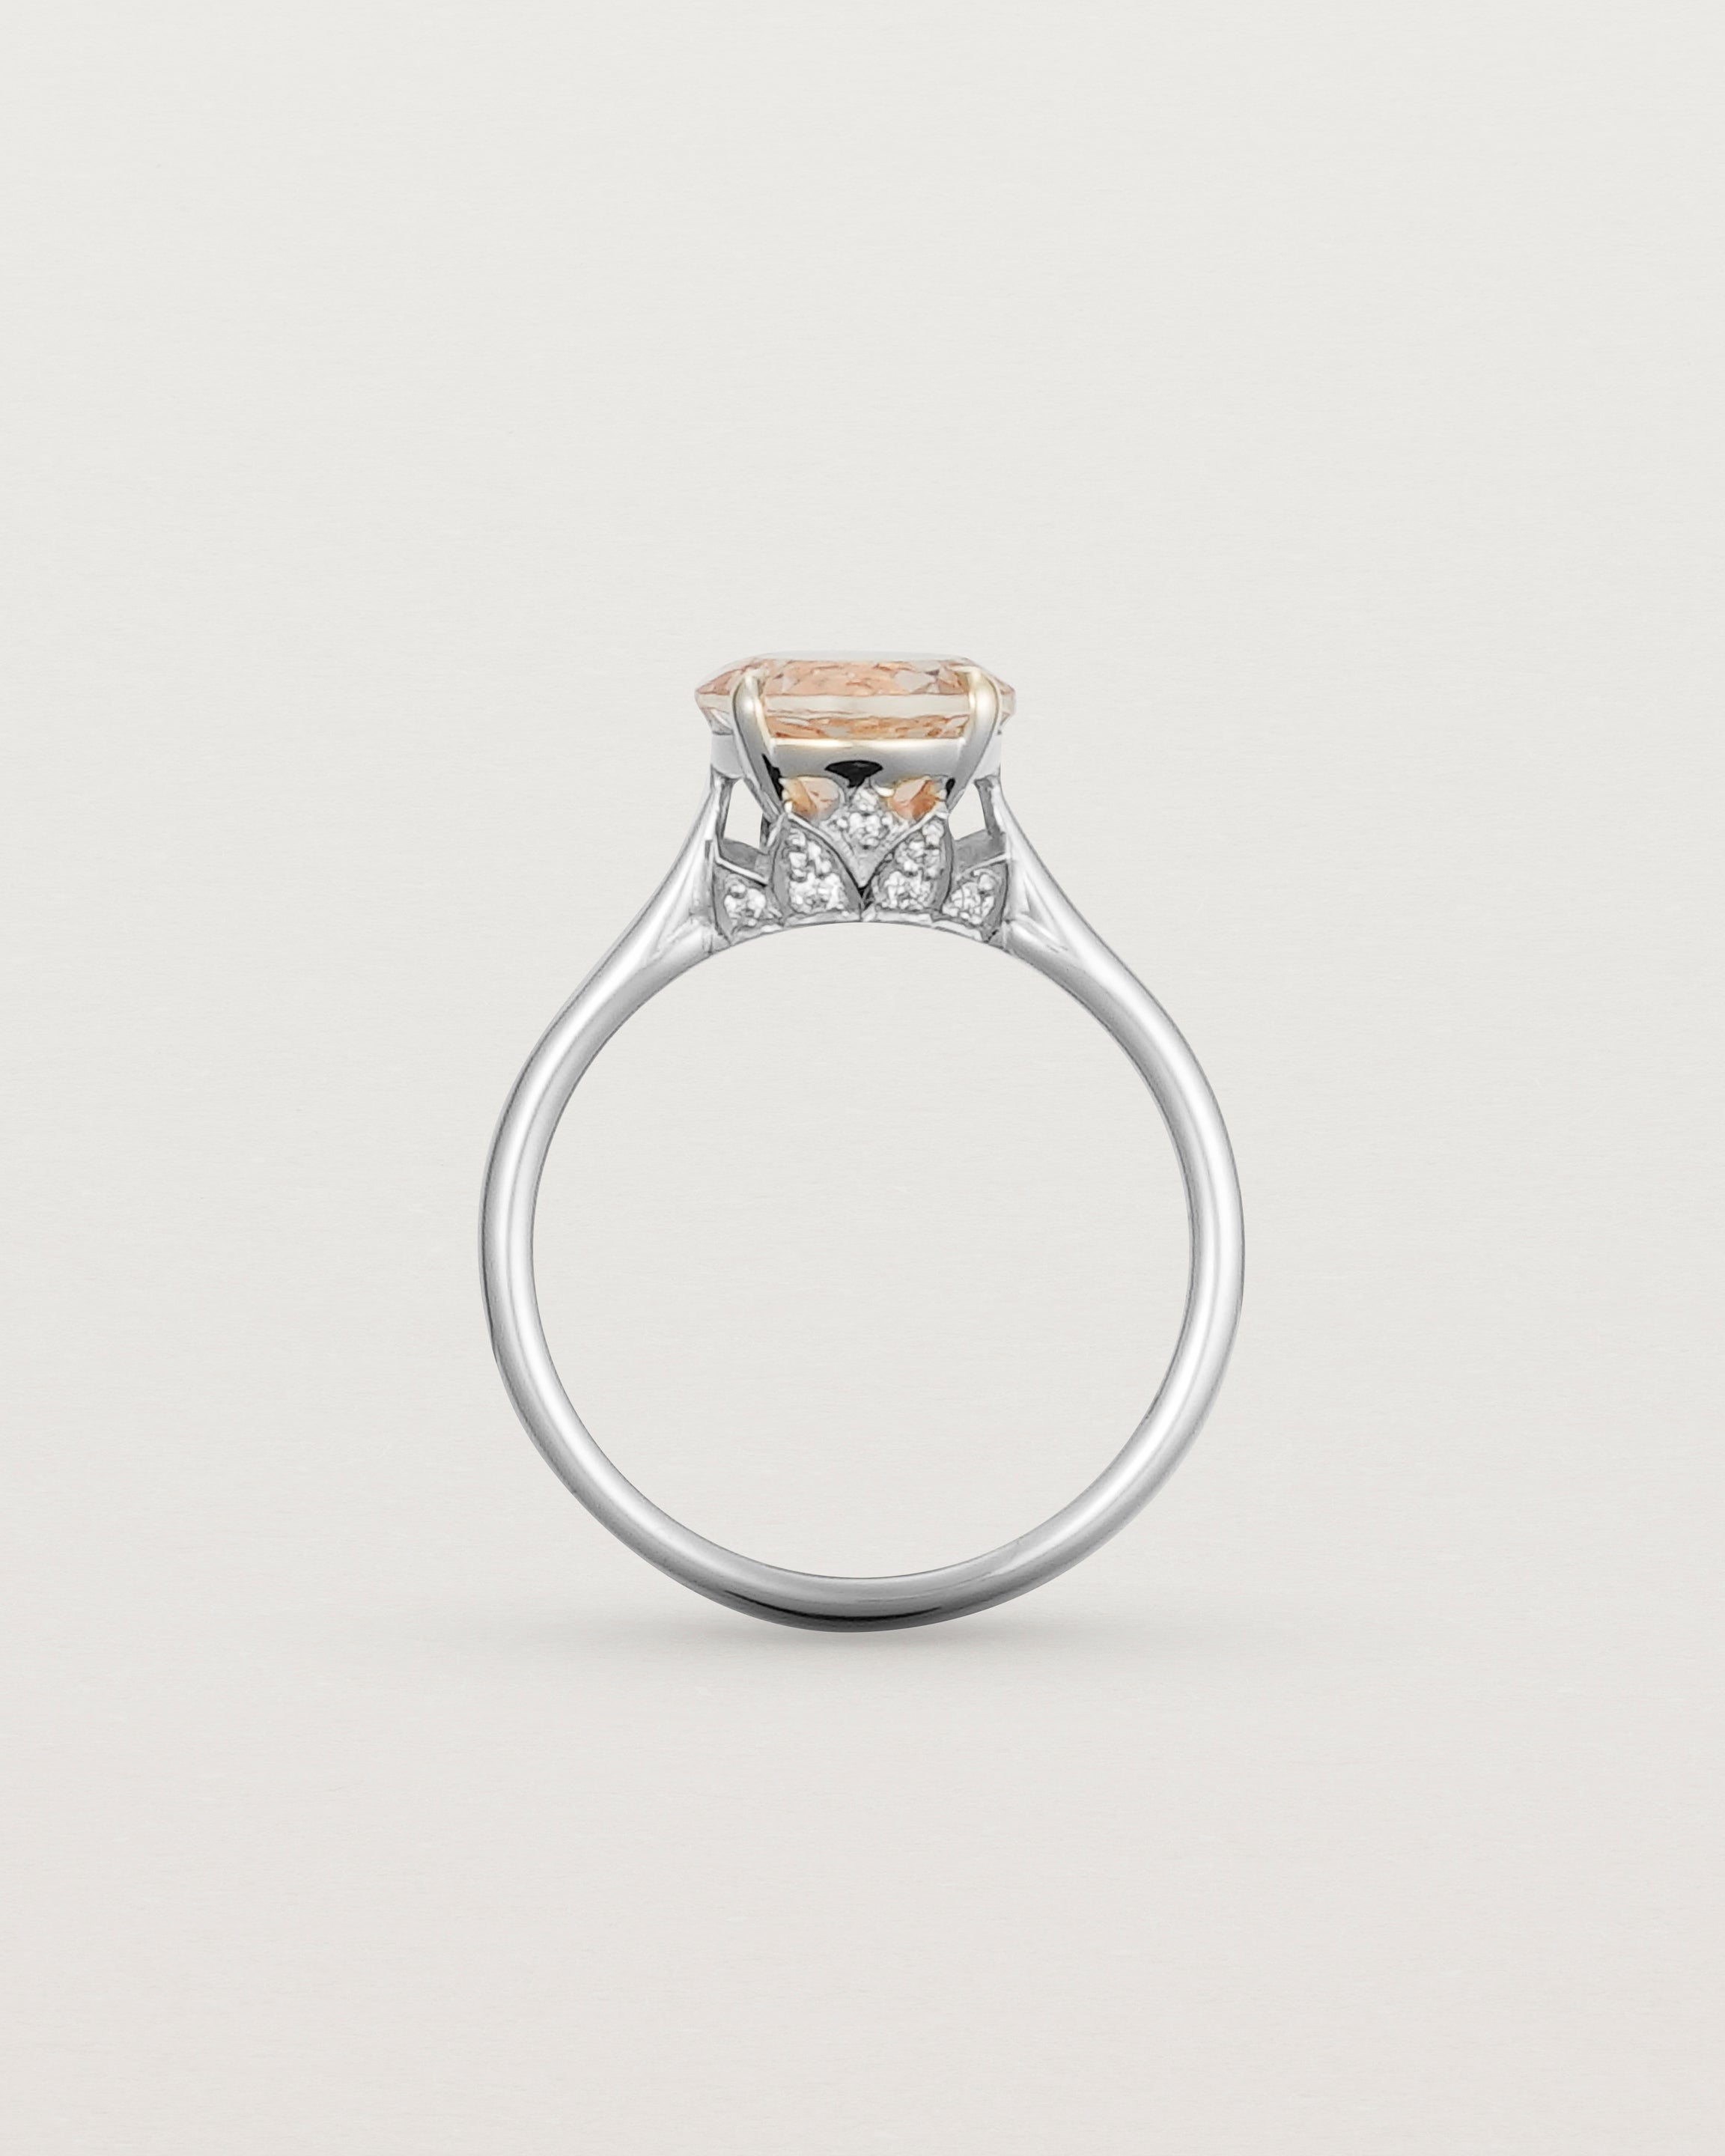 Standing view of the Kalina Round Solitaire | Savannah Sunstone | White Gold.